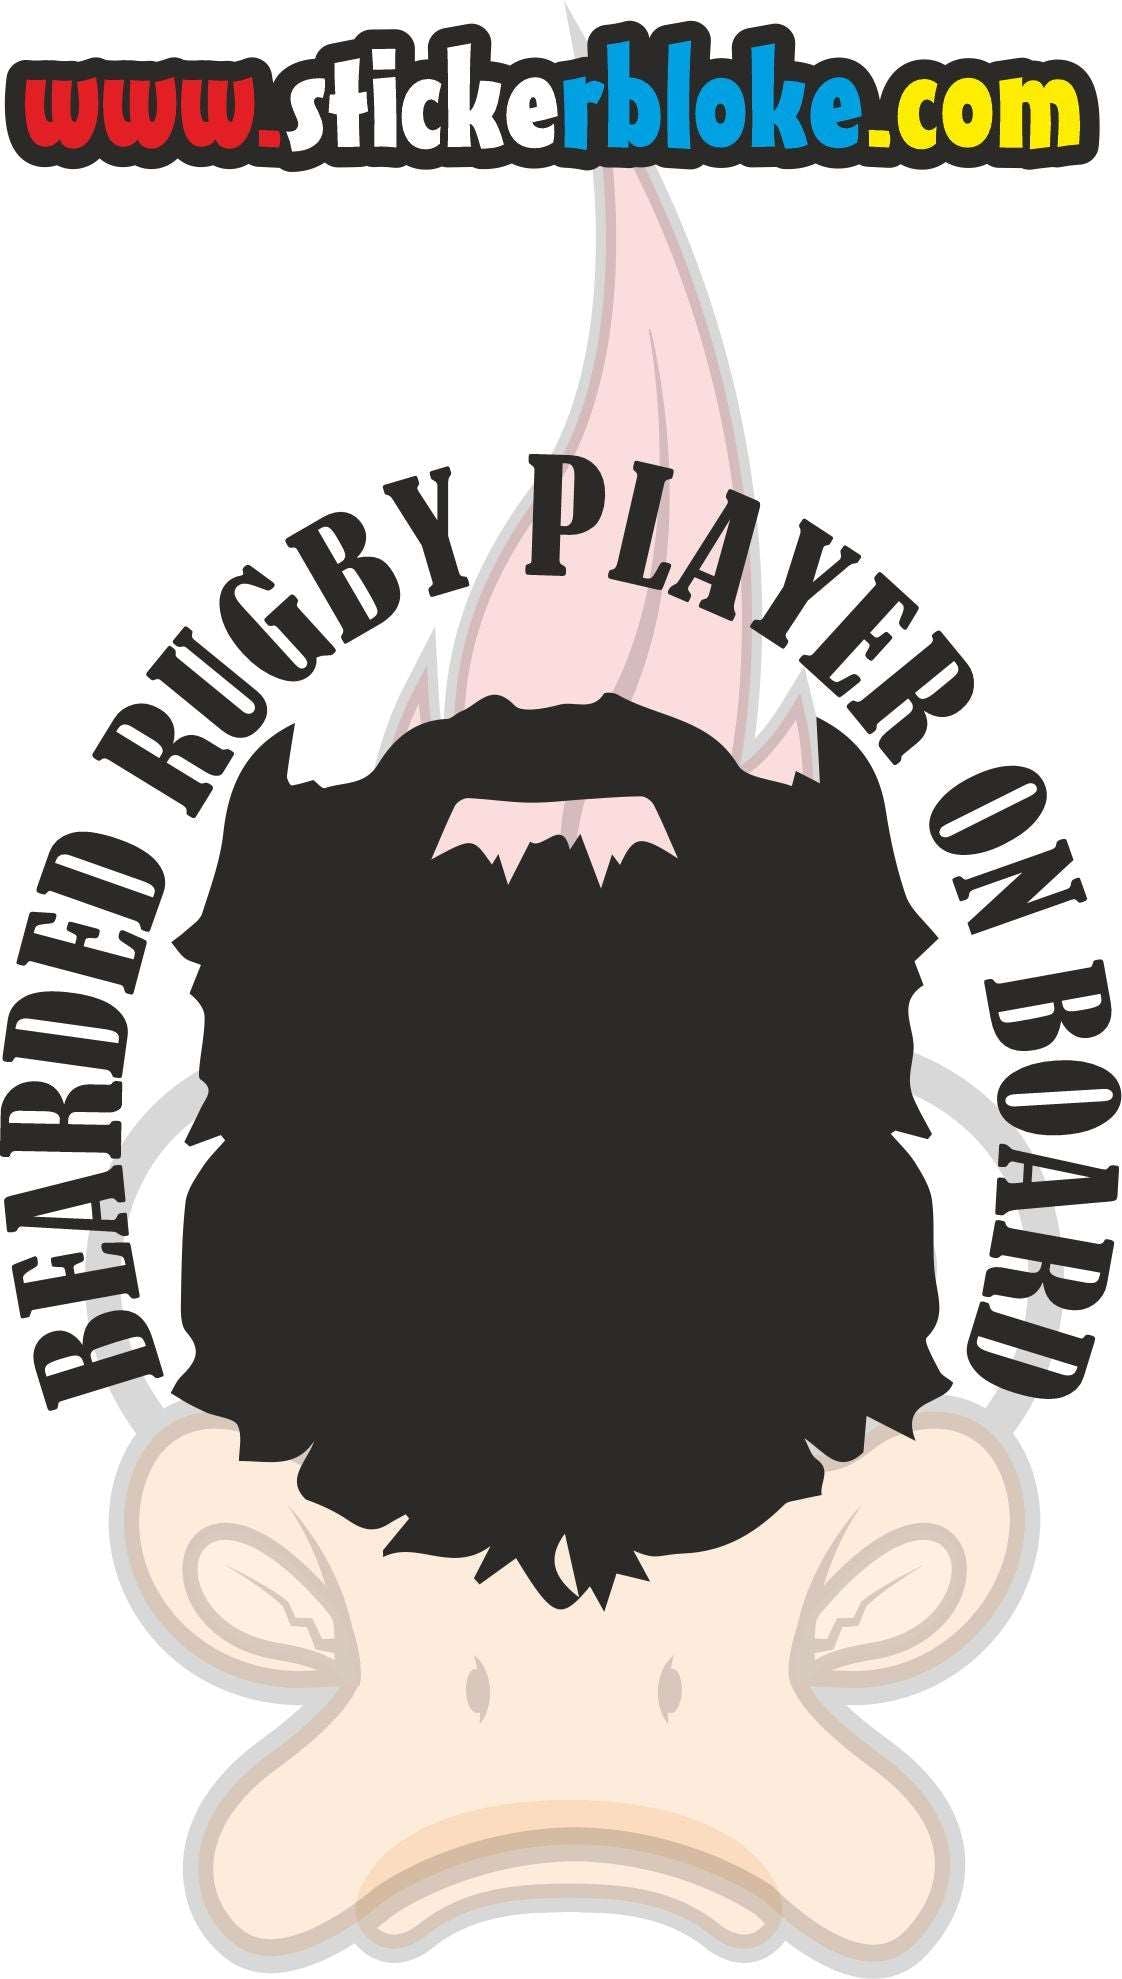 BEARDED RUGBY PLAYER ON BOARD STICKER